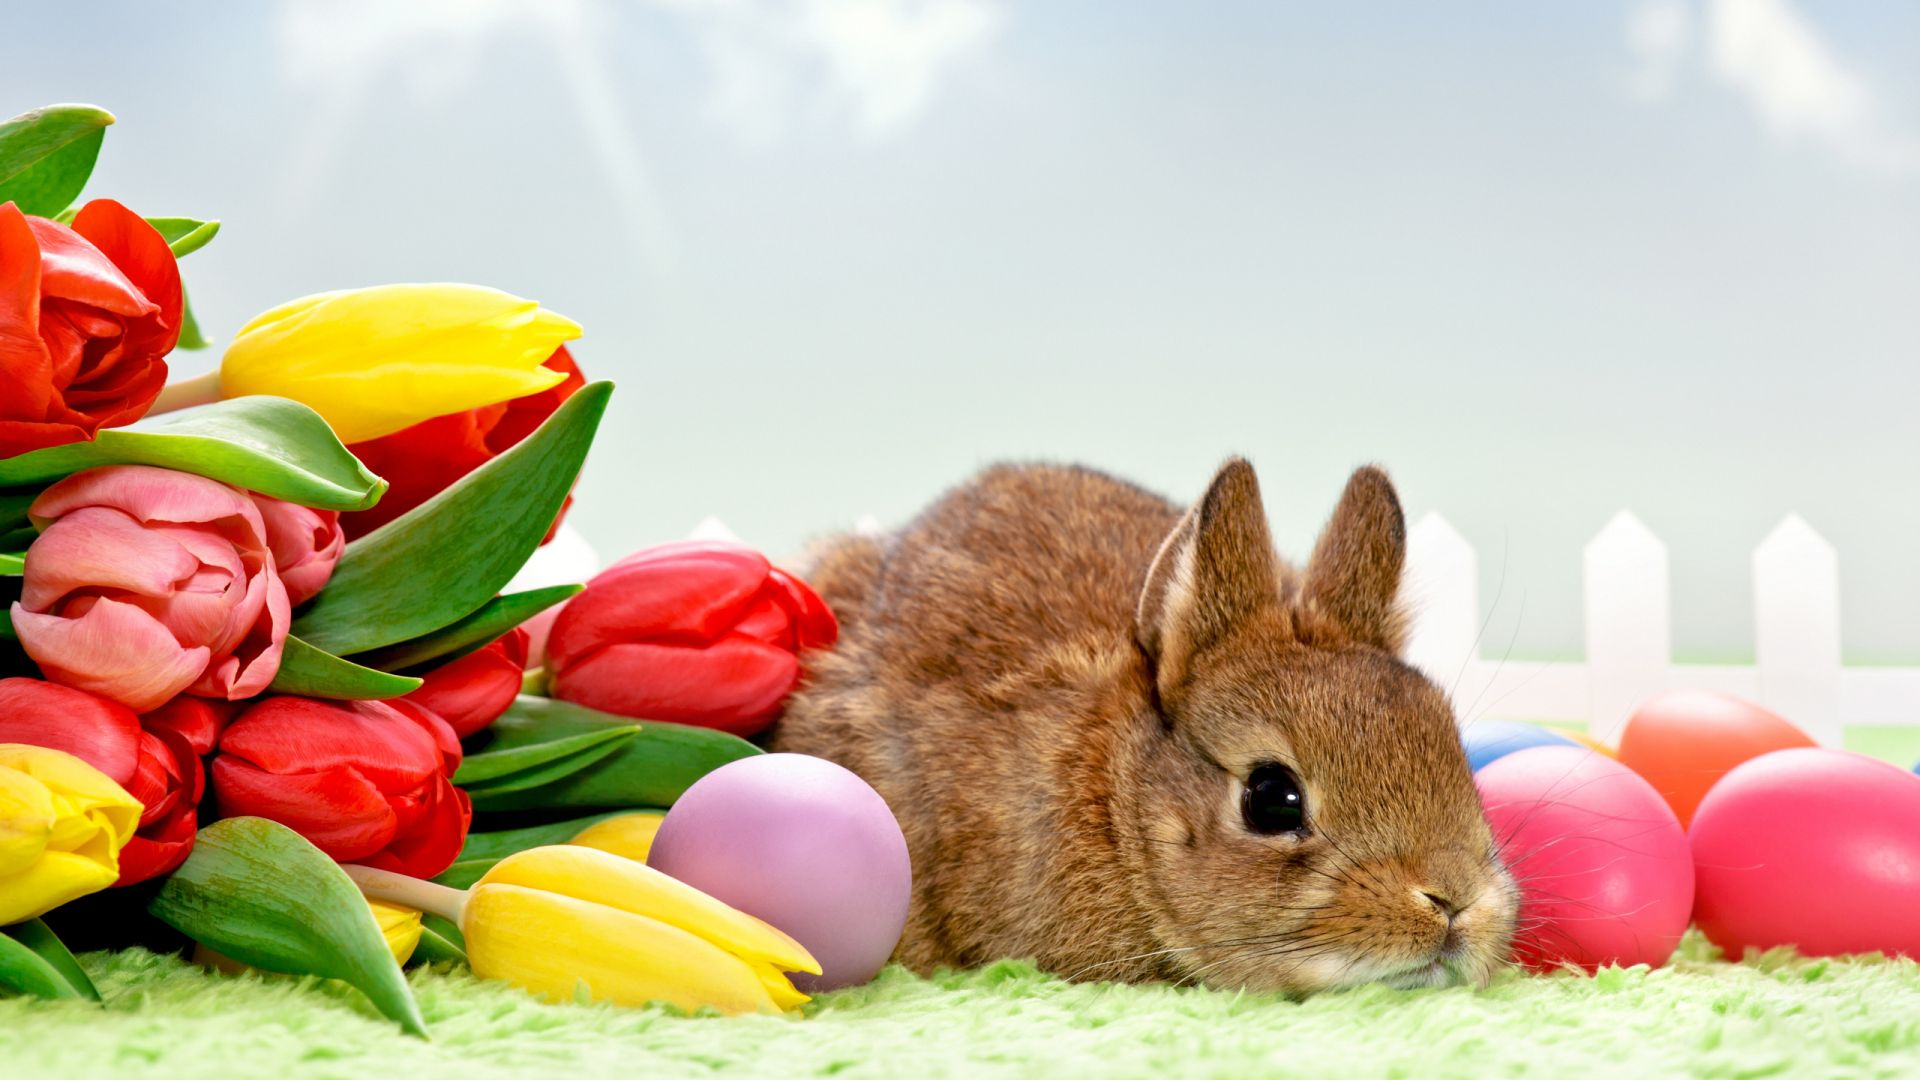 Easter Eggs with Rabbit Wallpaper